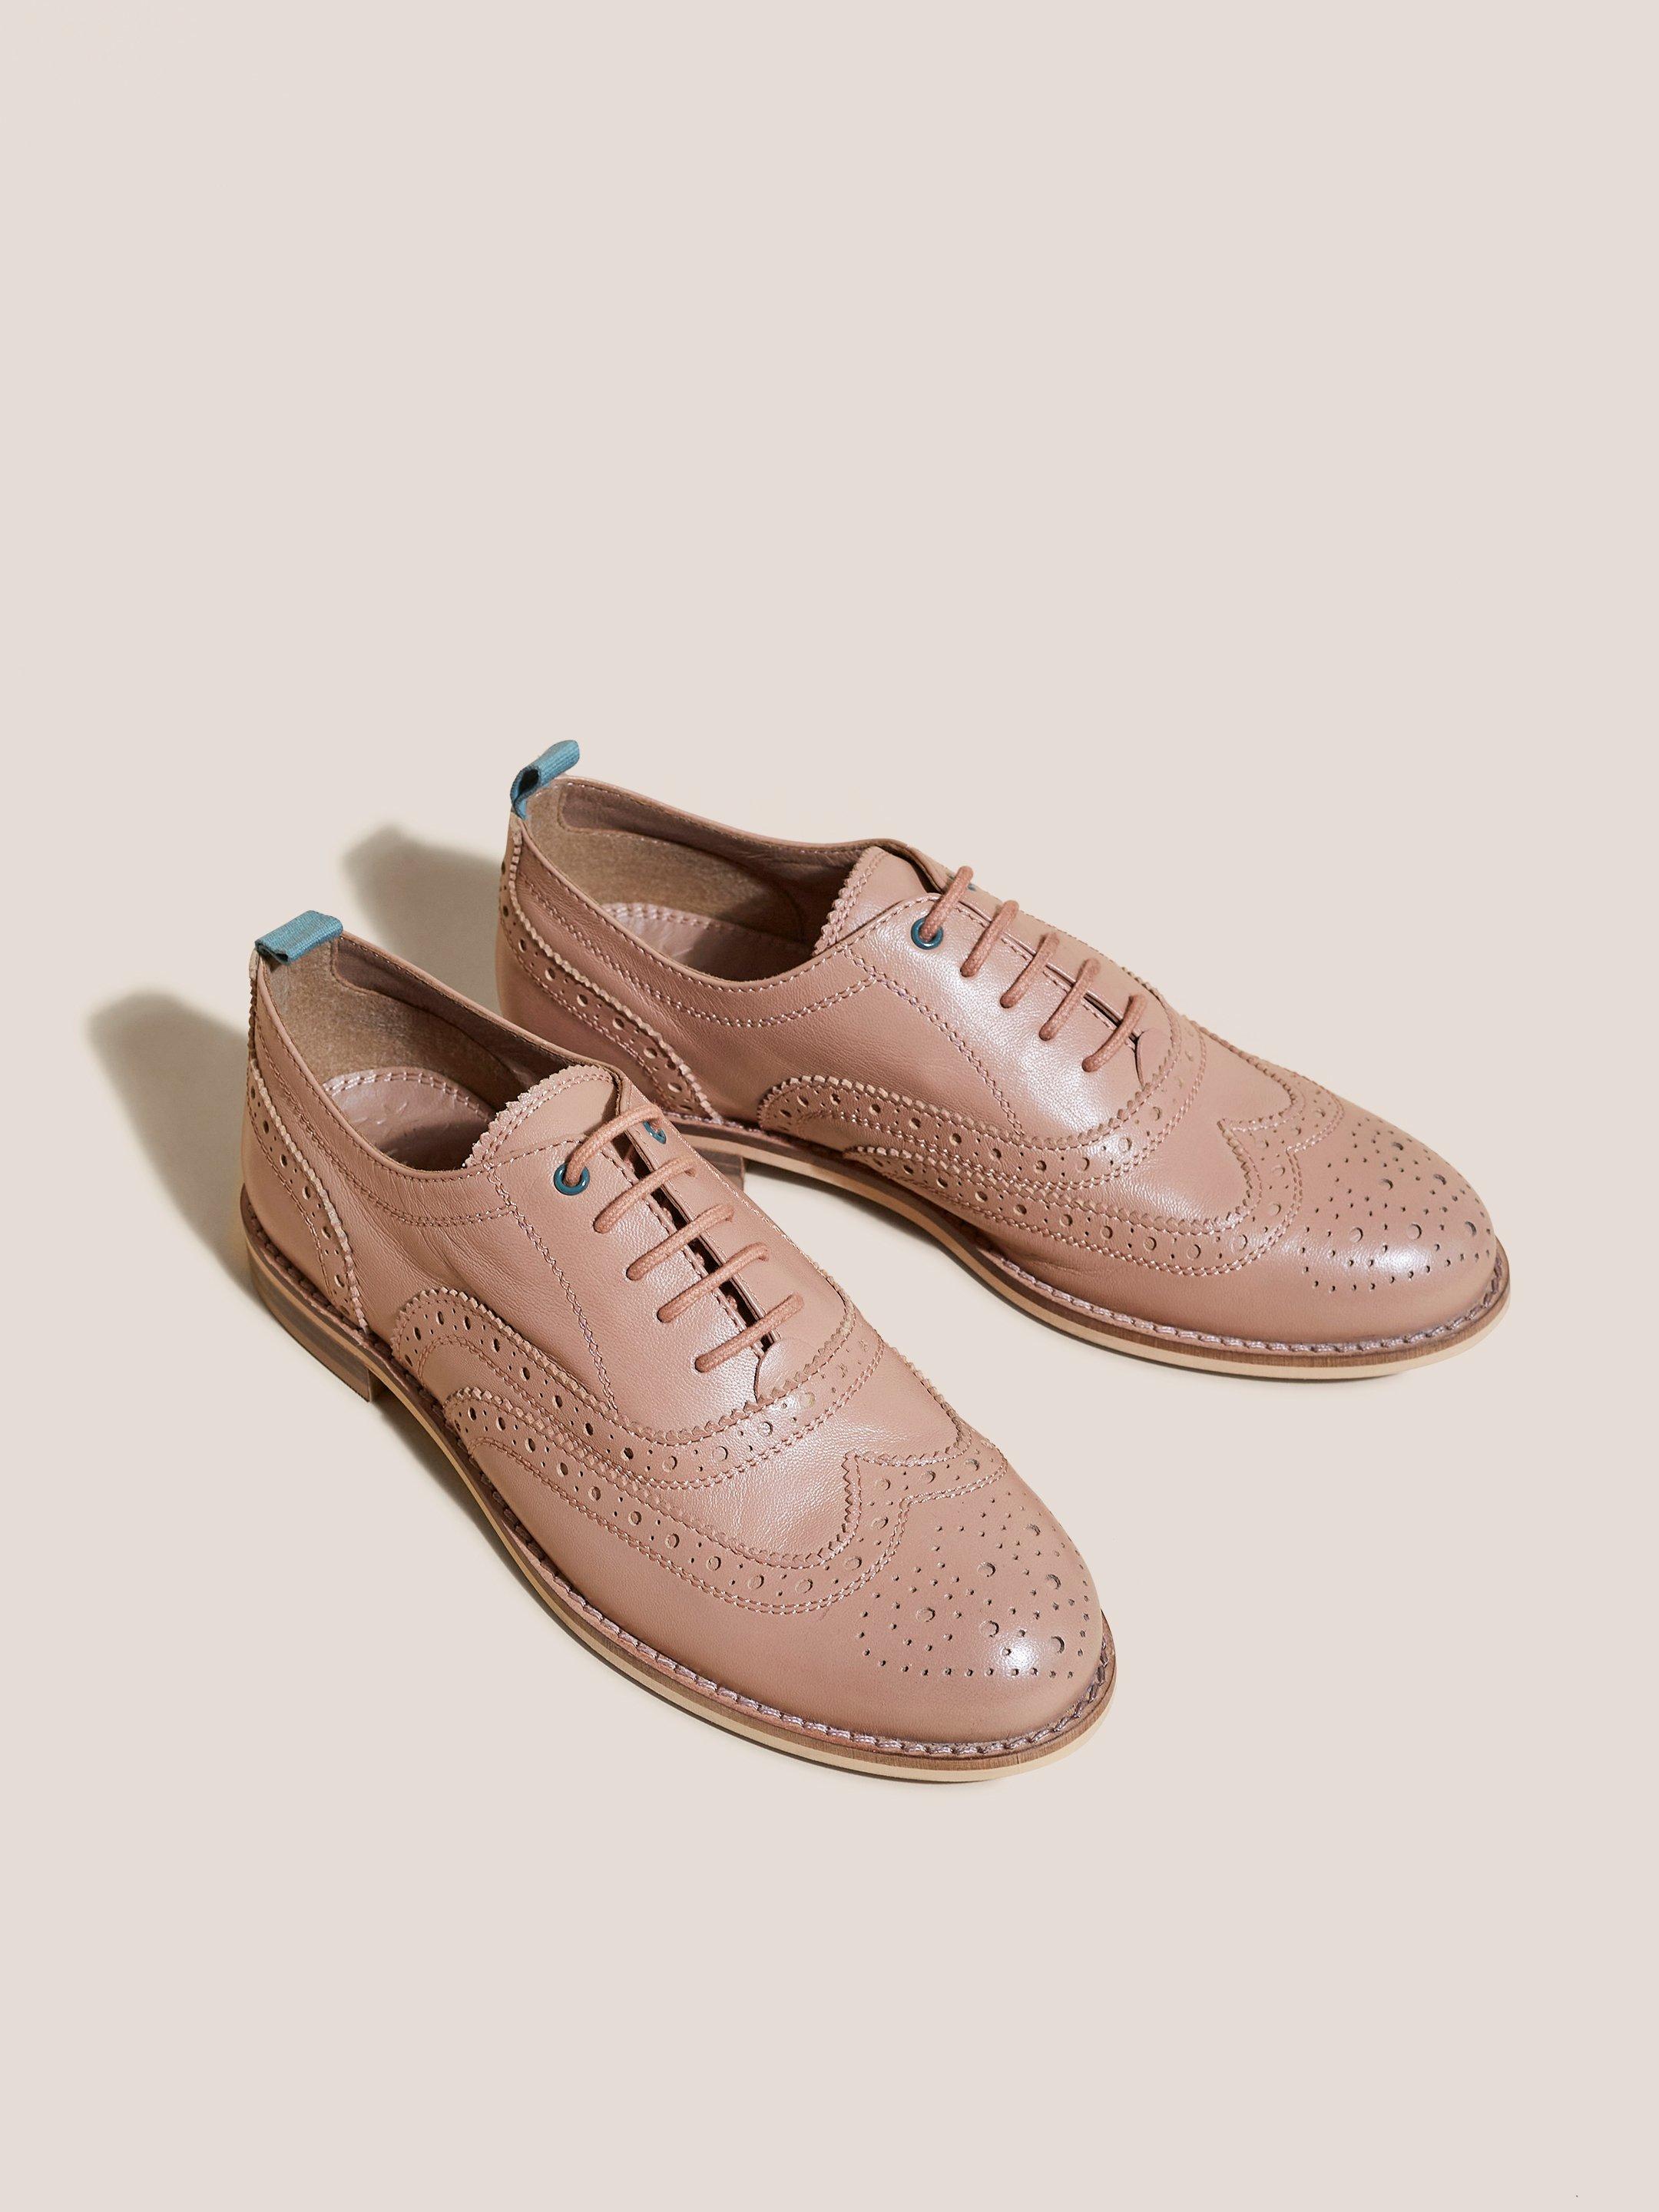 Thistle Lace Up Brogue in PINK MLT - FLAT FRONT